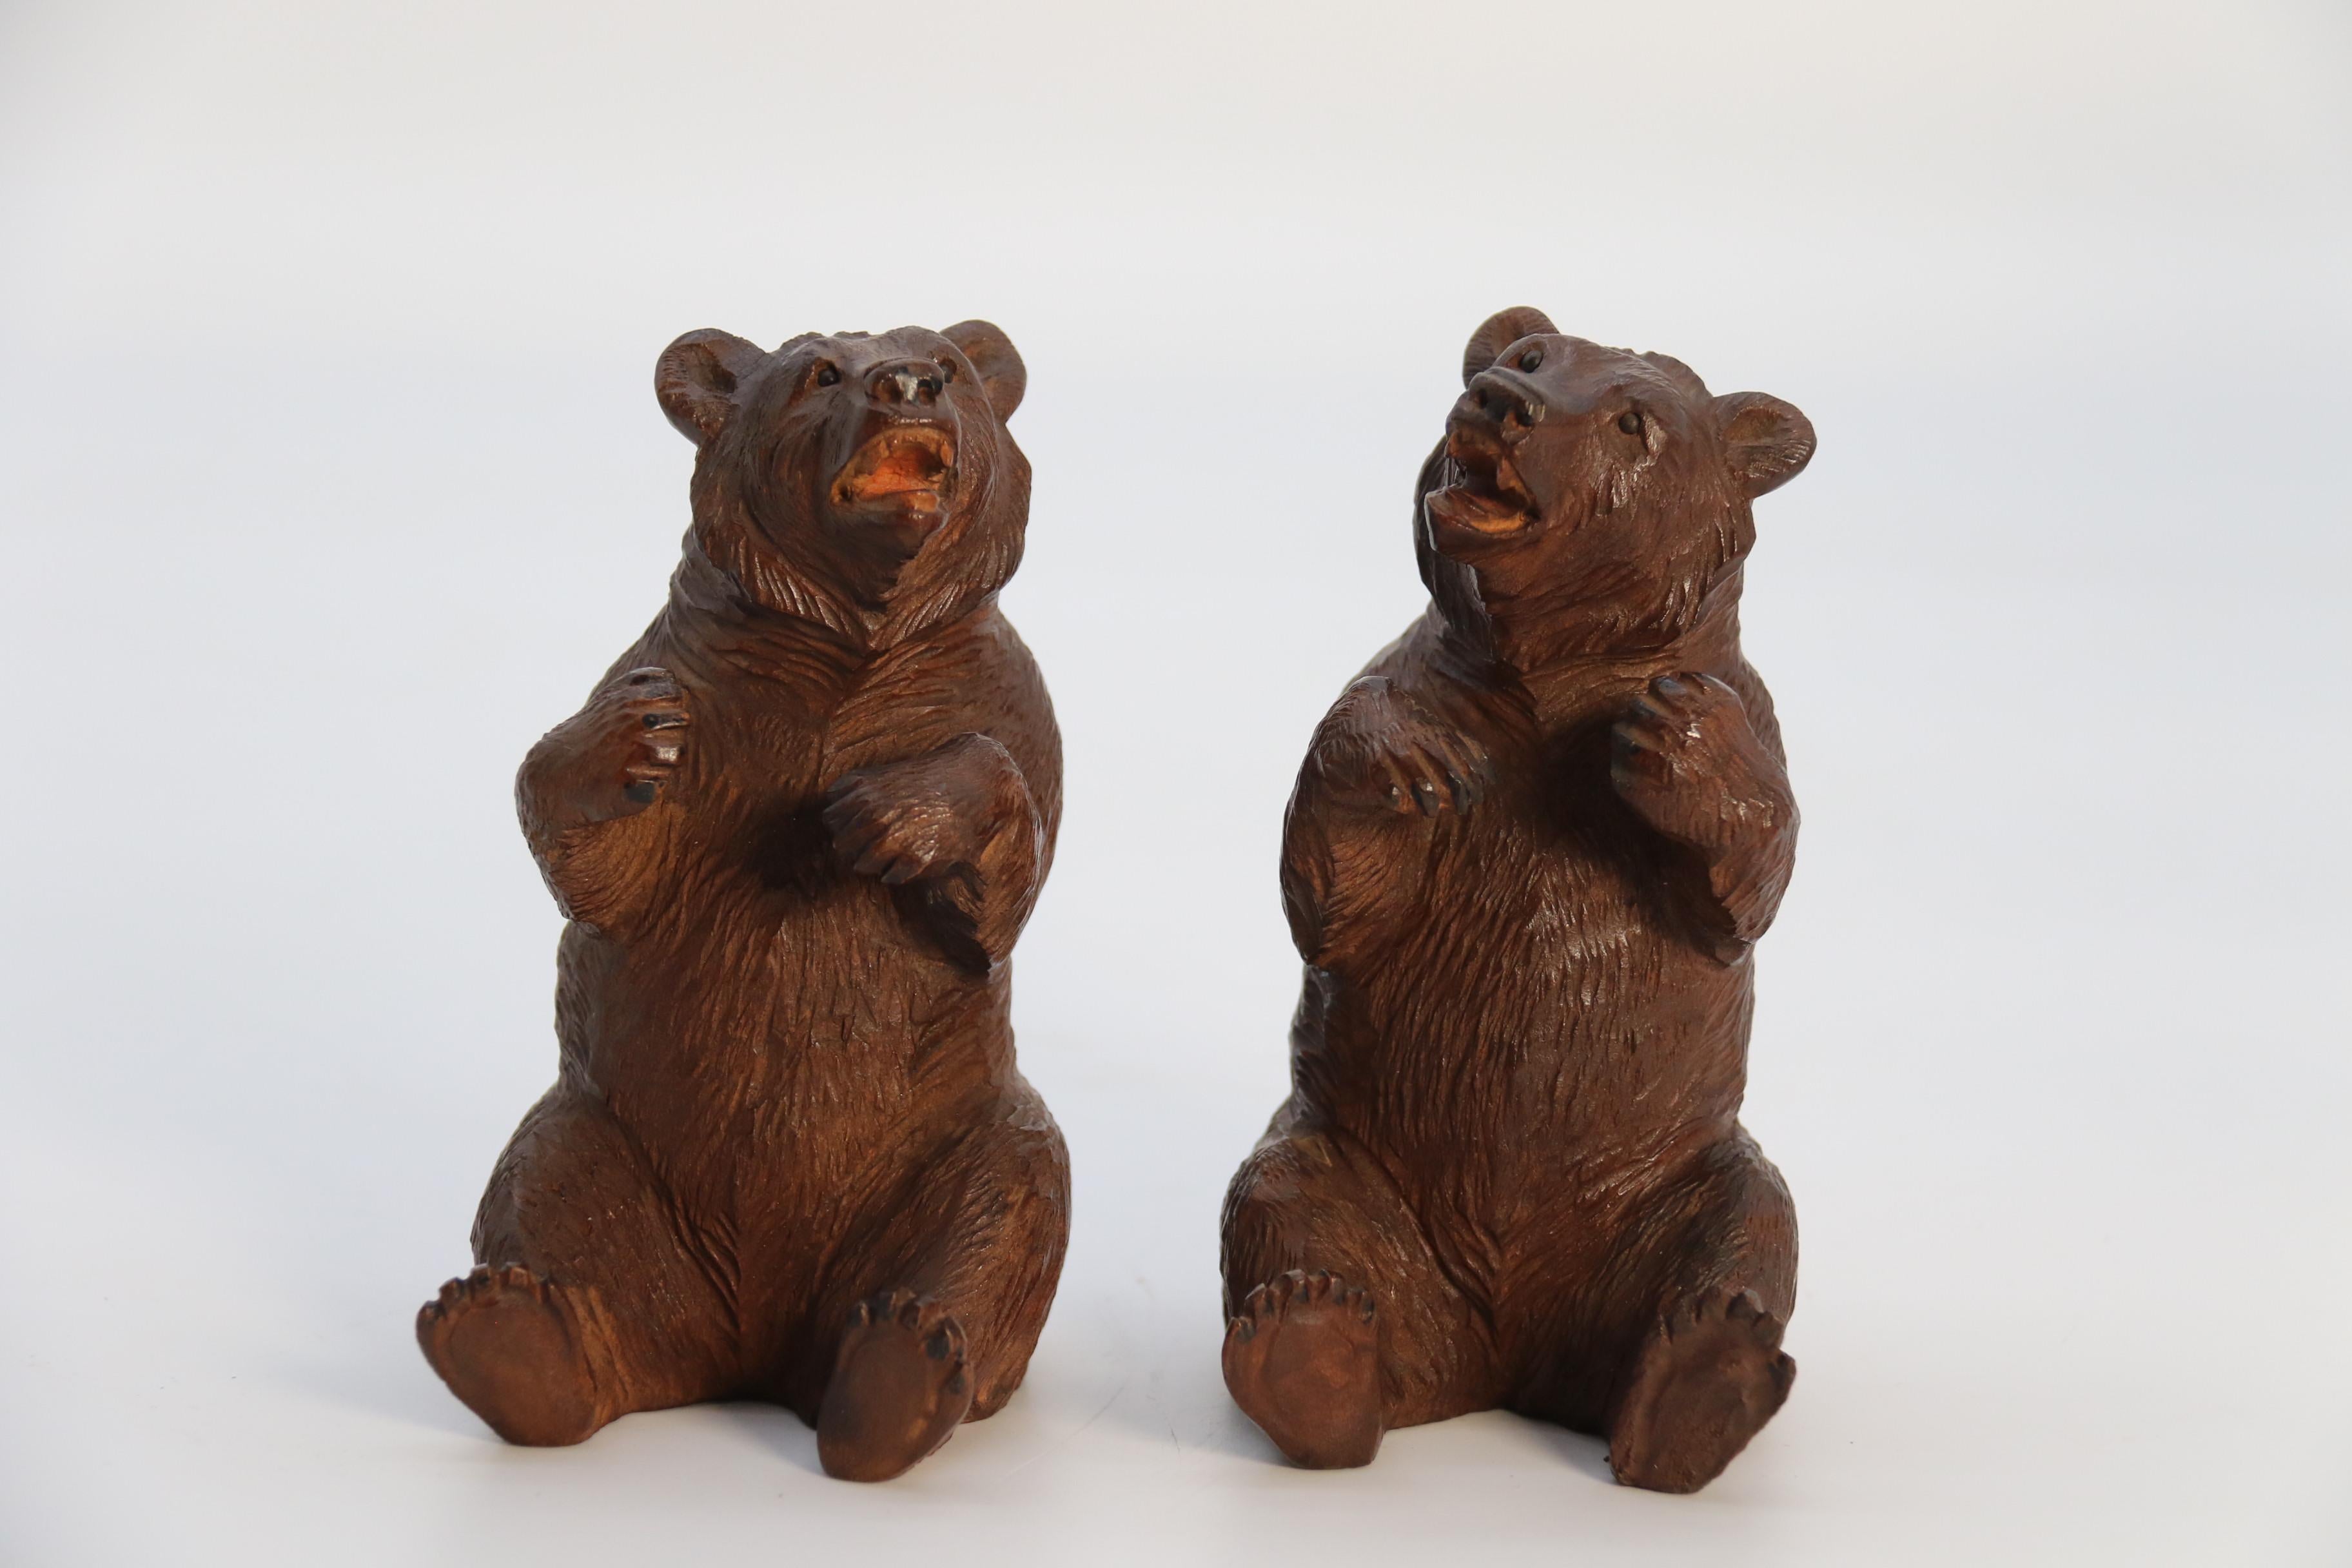 carved wooden bears